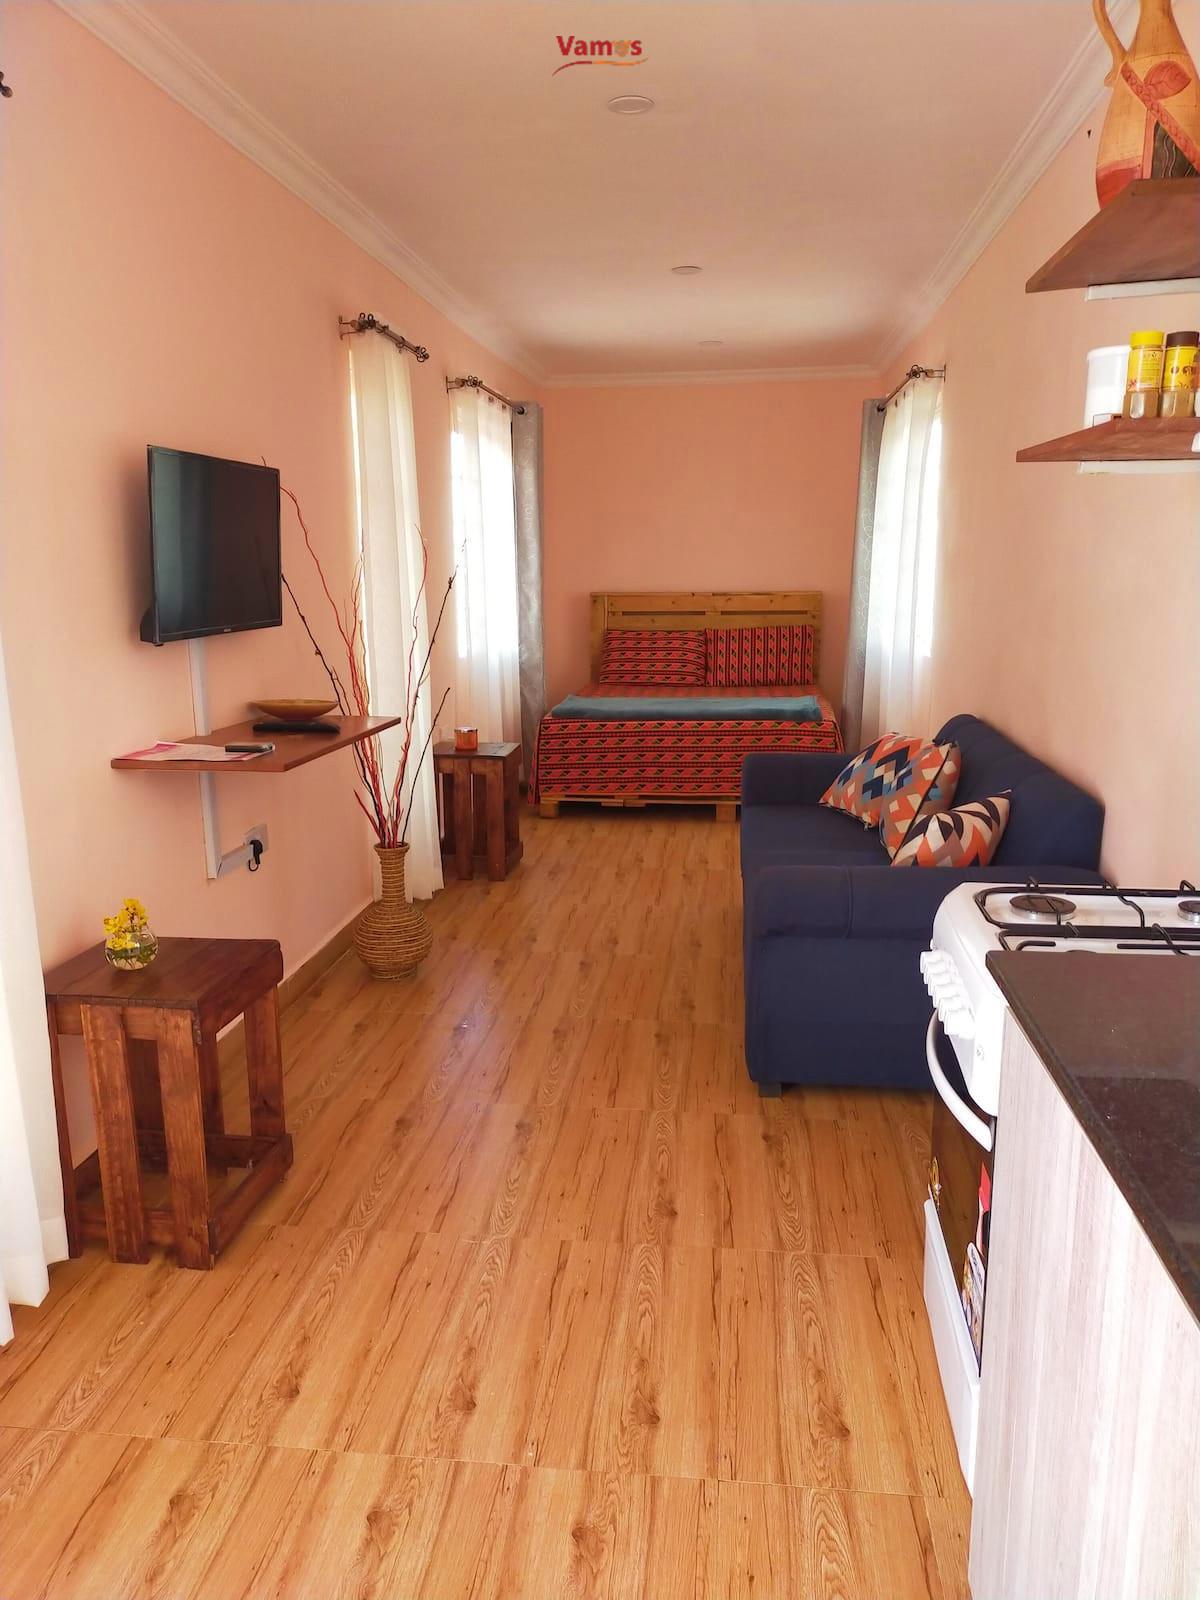 Stay solo ama na bae in this container house in Ngong from 2359 per person!